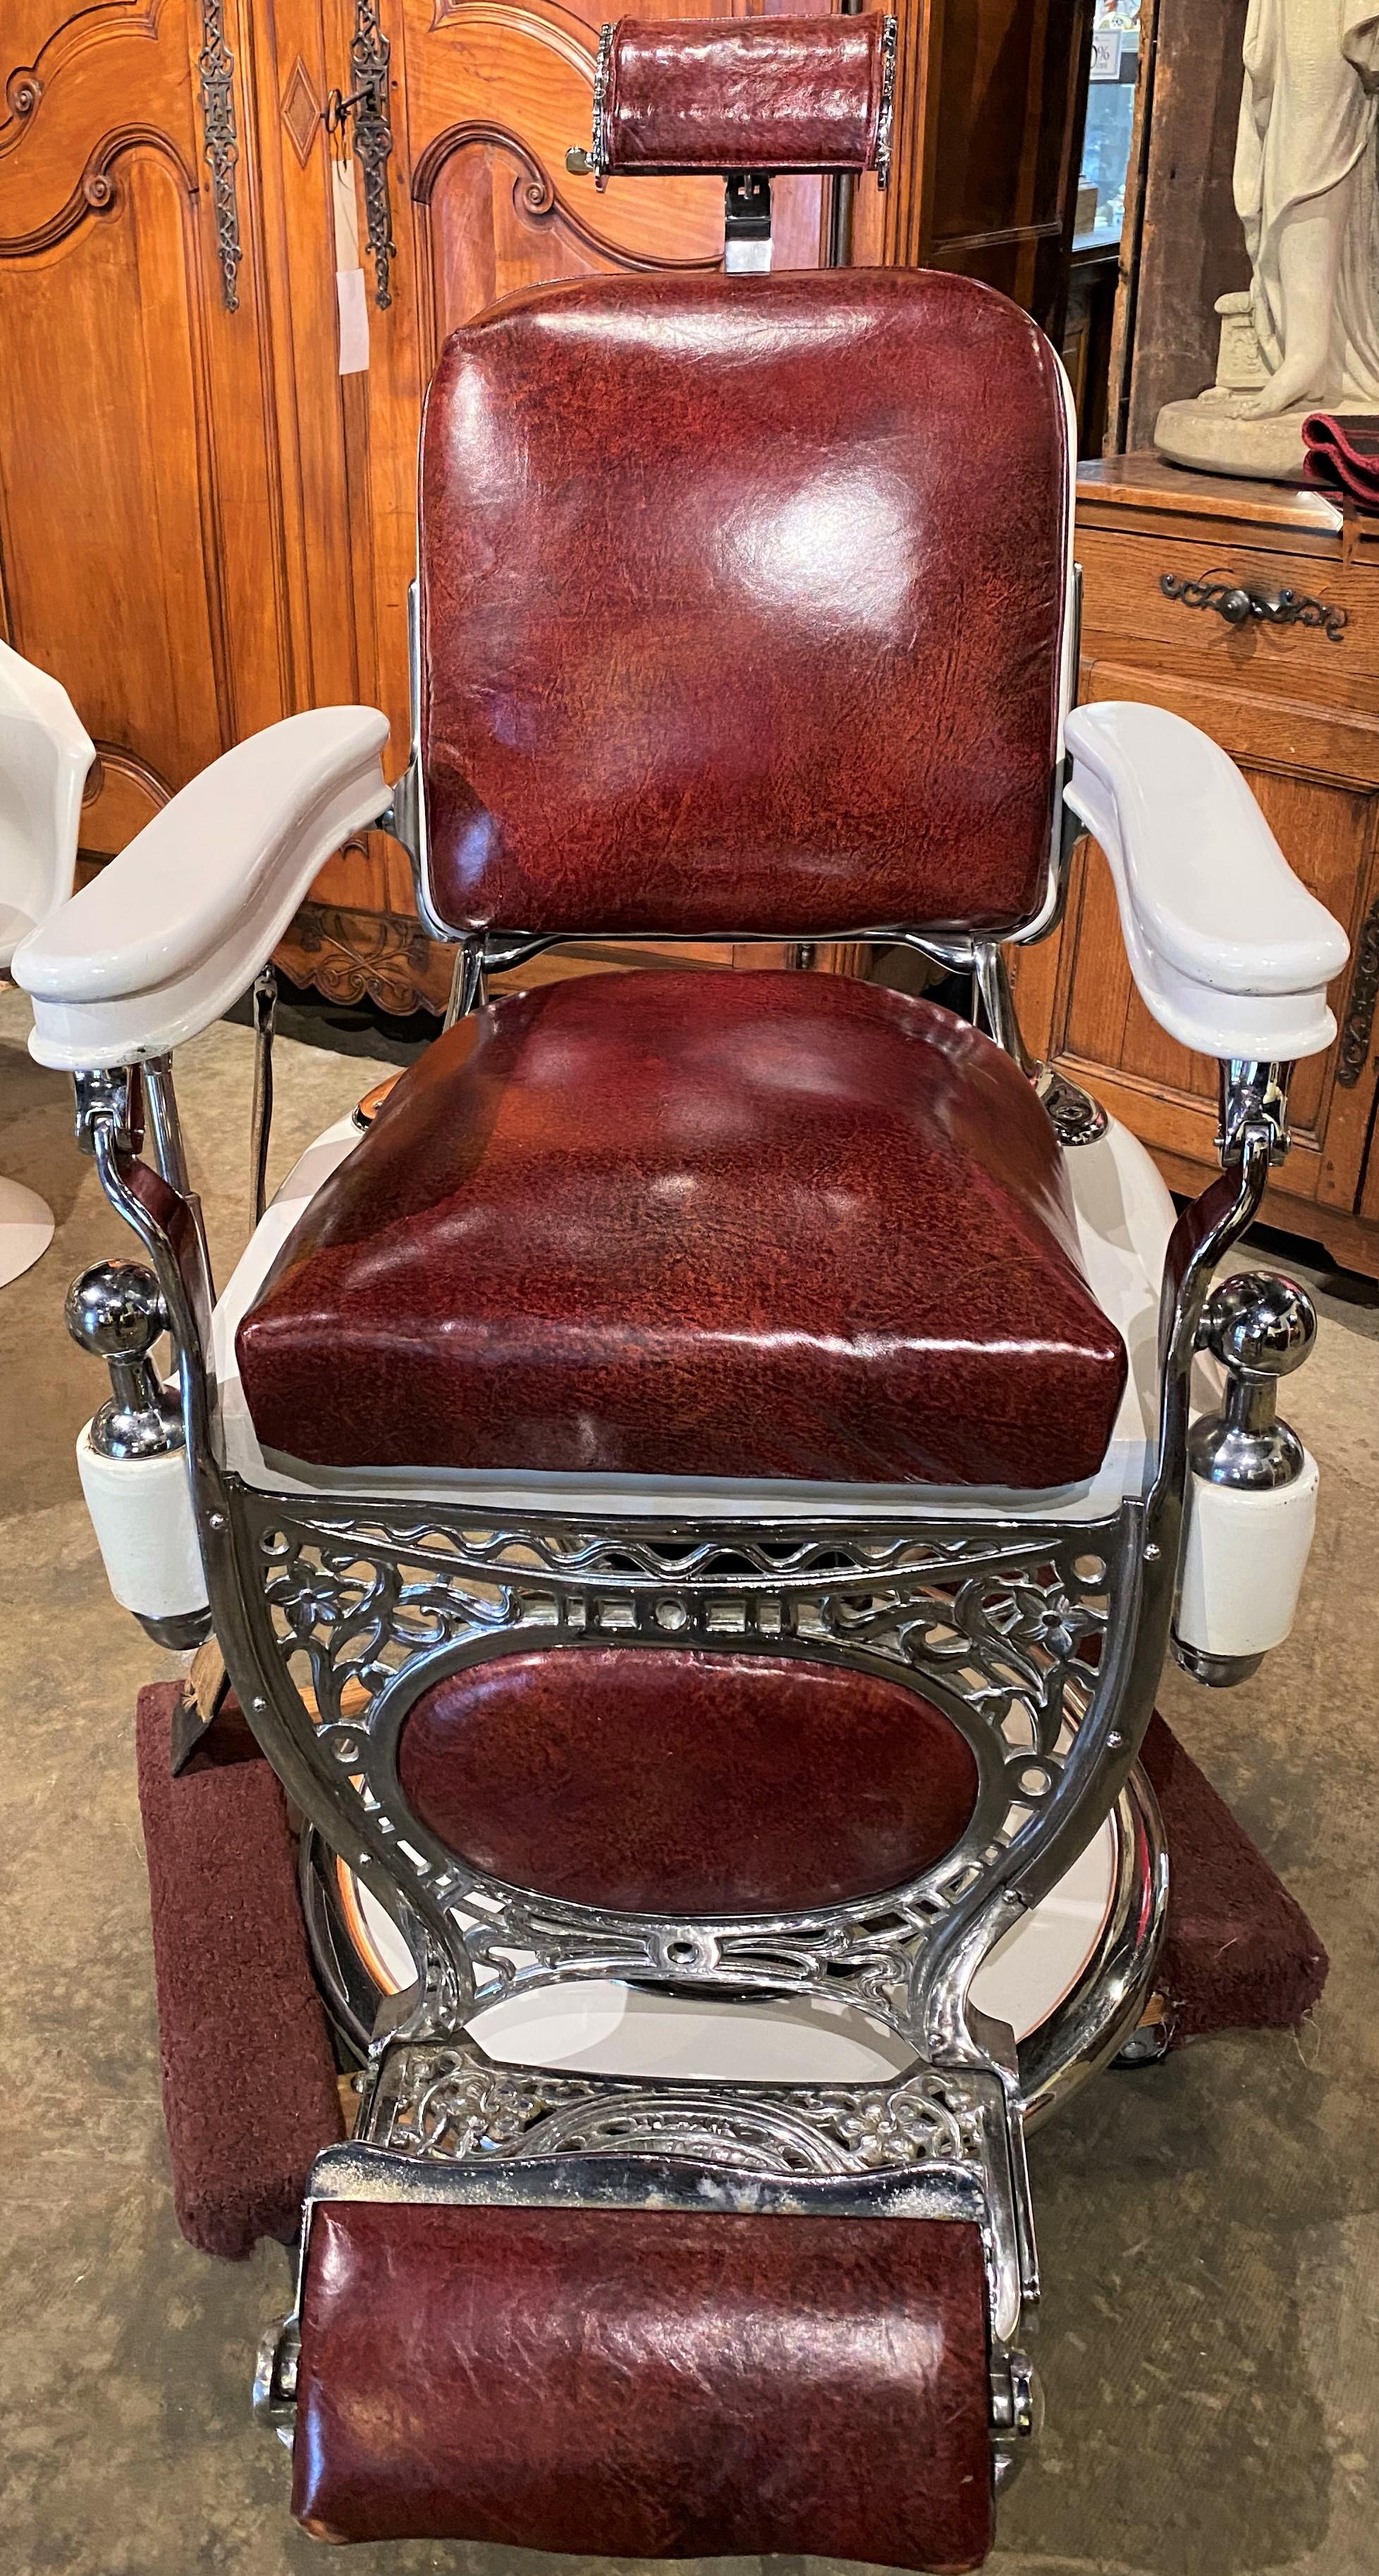 A fine example of a heavy chromed, porcelained, and scrolled metal frame barber chair by Theo A. Kochs, Chicago, with porcelain arms, red seat, back, headrest, and footrest, adjustable back and swivel seat height (hydraulic pump handle on side), and